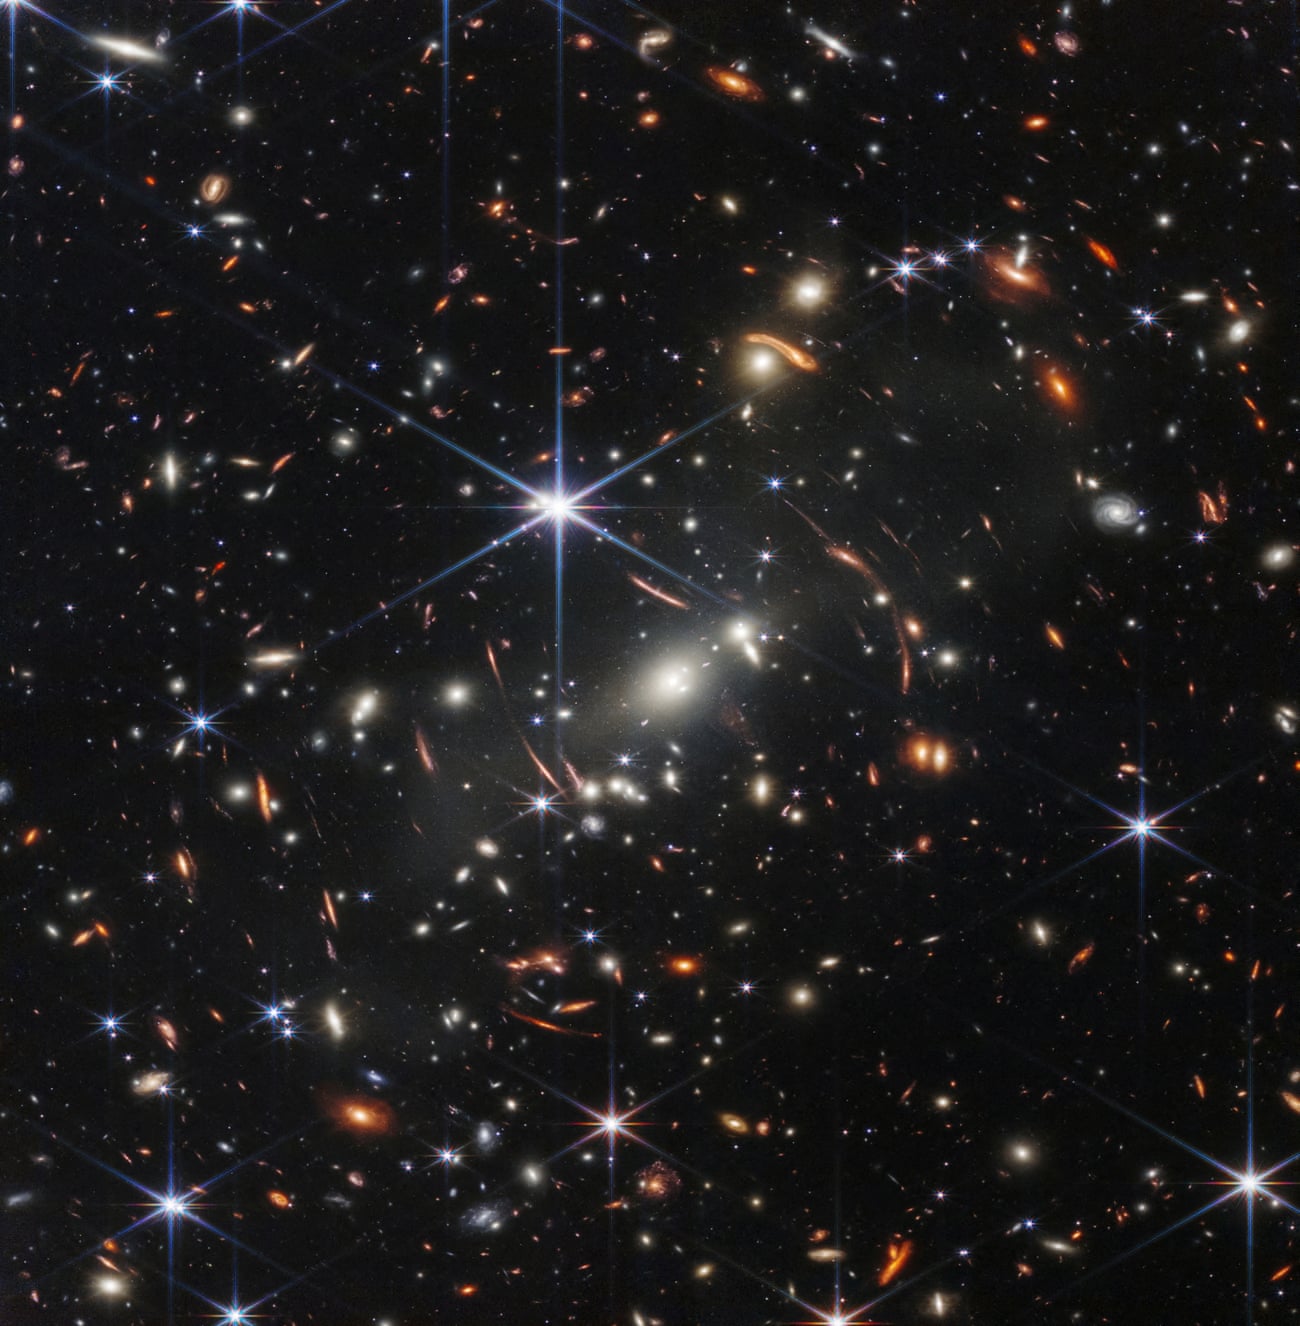 The galaxy cluster SMACS 0723, known as Webb’s First Deep Field, in a composite made from images at different wavelengths taken with a near-infrared camera